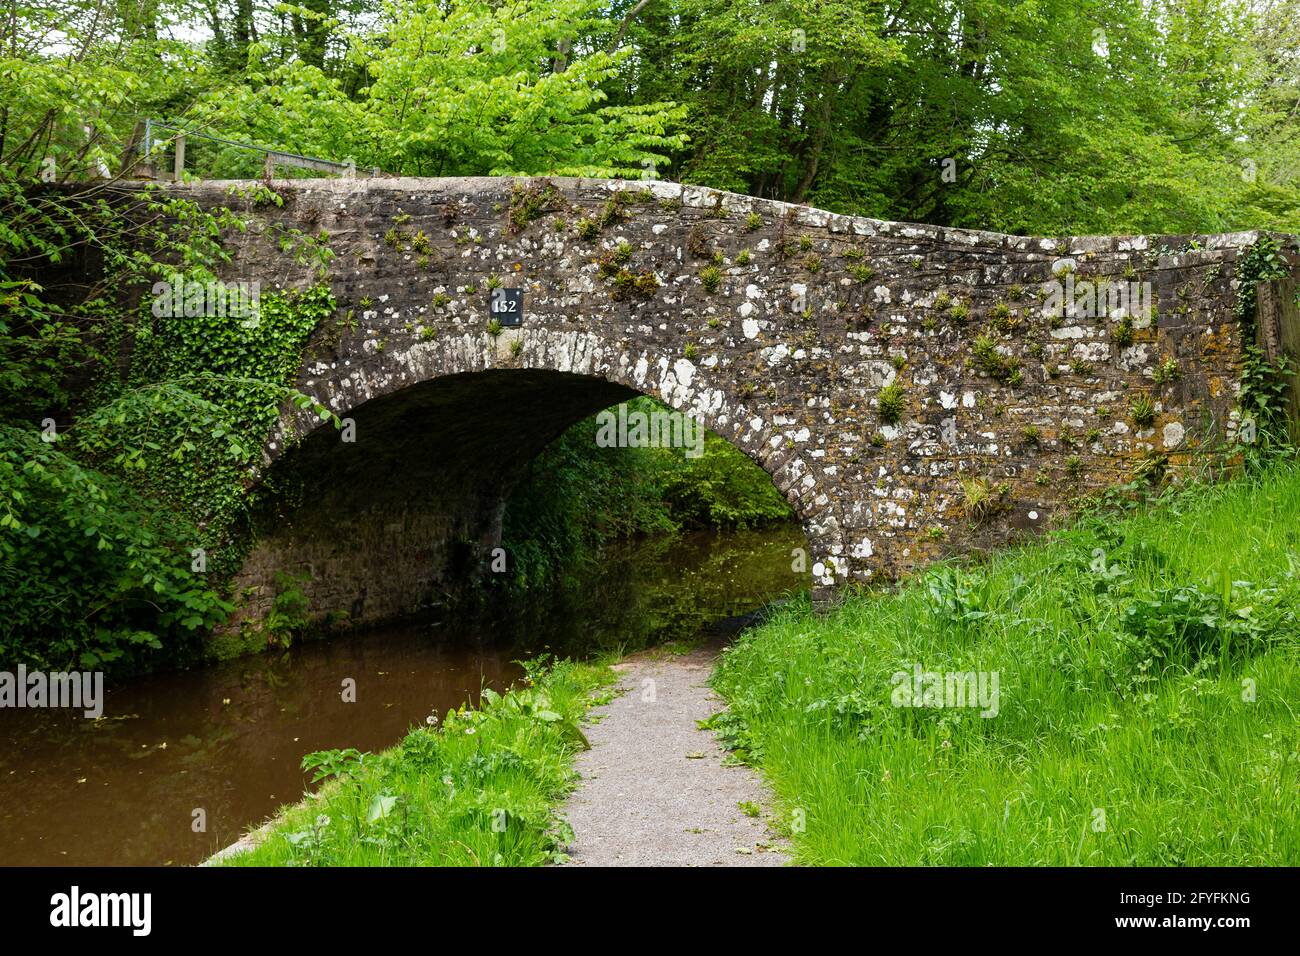 Bridge 152, Monmouthshire and Brecon Canal, Powys, Wales, UK Stock Photo